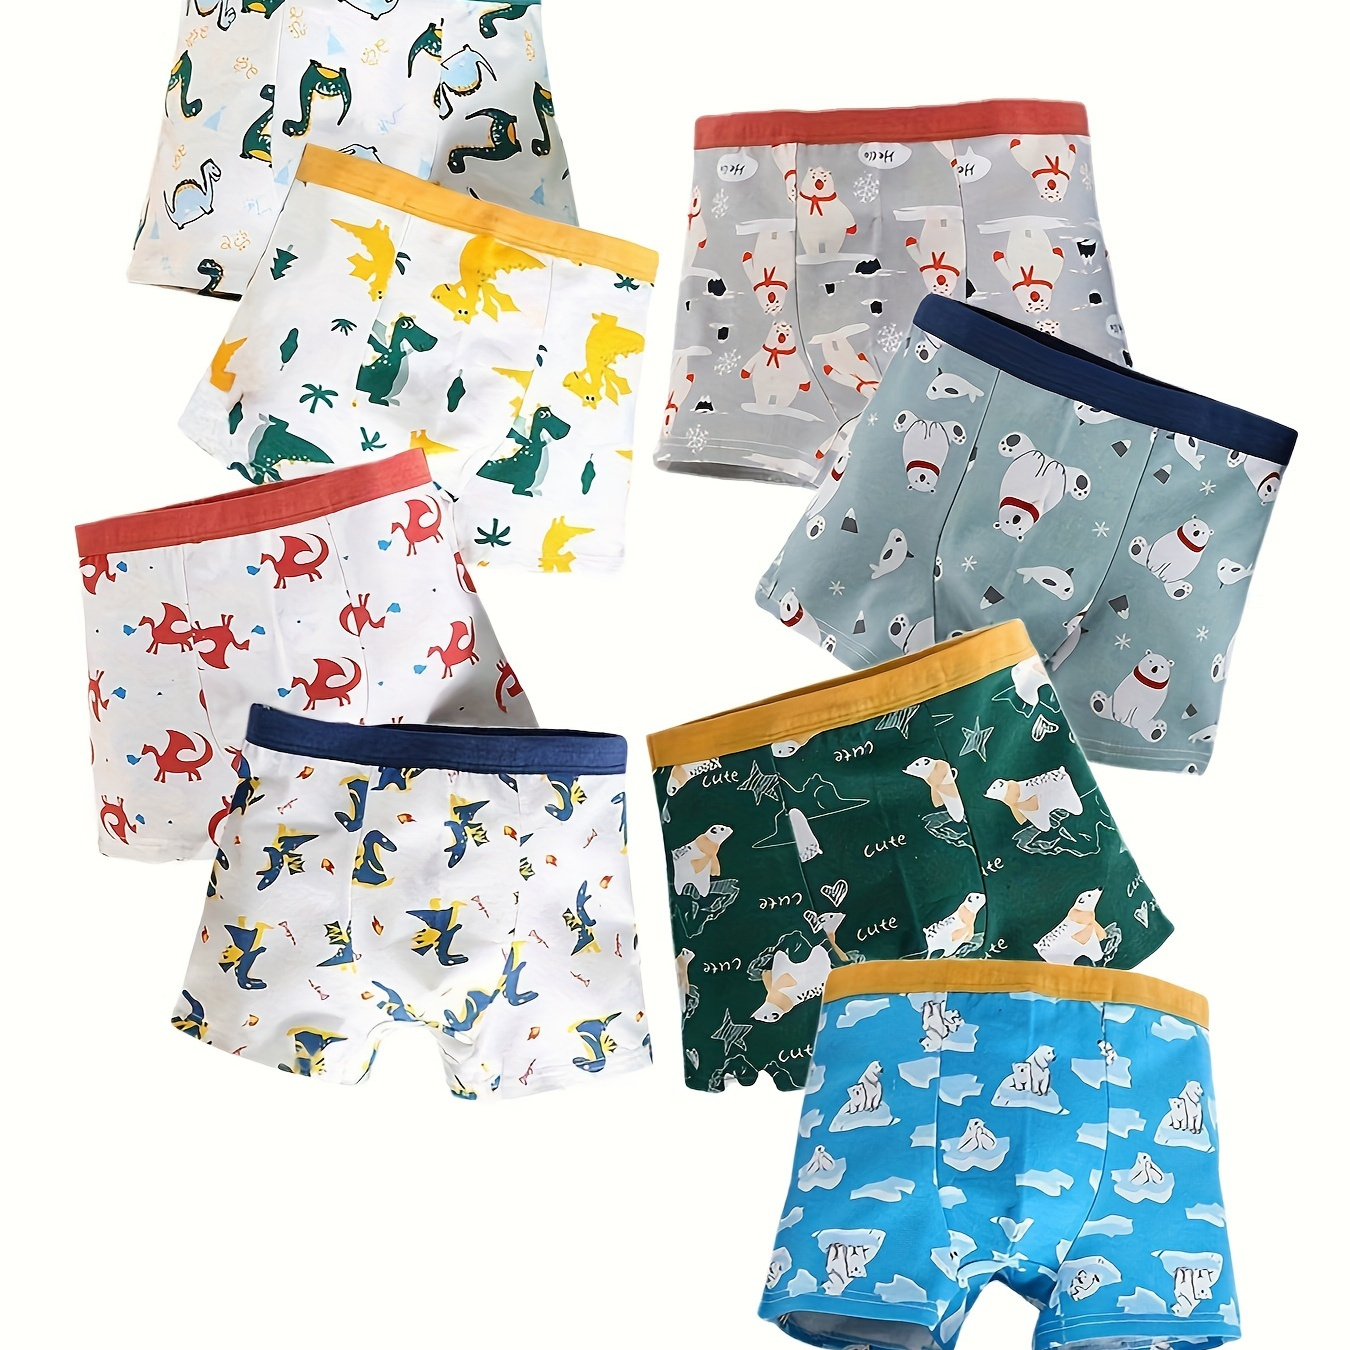 

8pcs Boys Boxer Briefs Cartoon Animal Pattern Print Cotton Bottoming Underwear Soft Comfy Breathable Kids Shorts For All Seasons